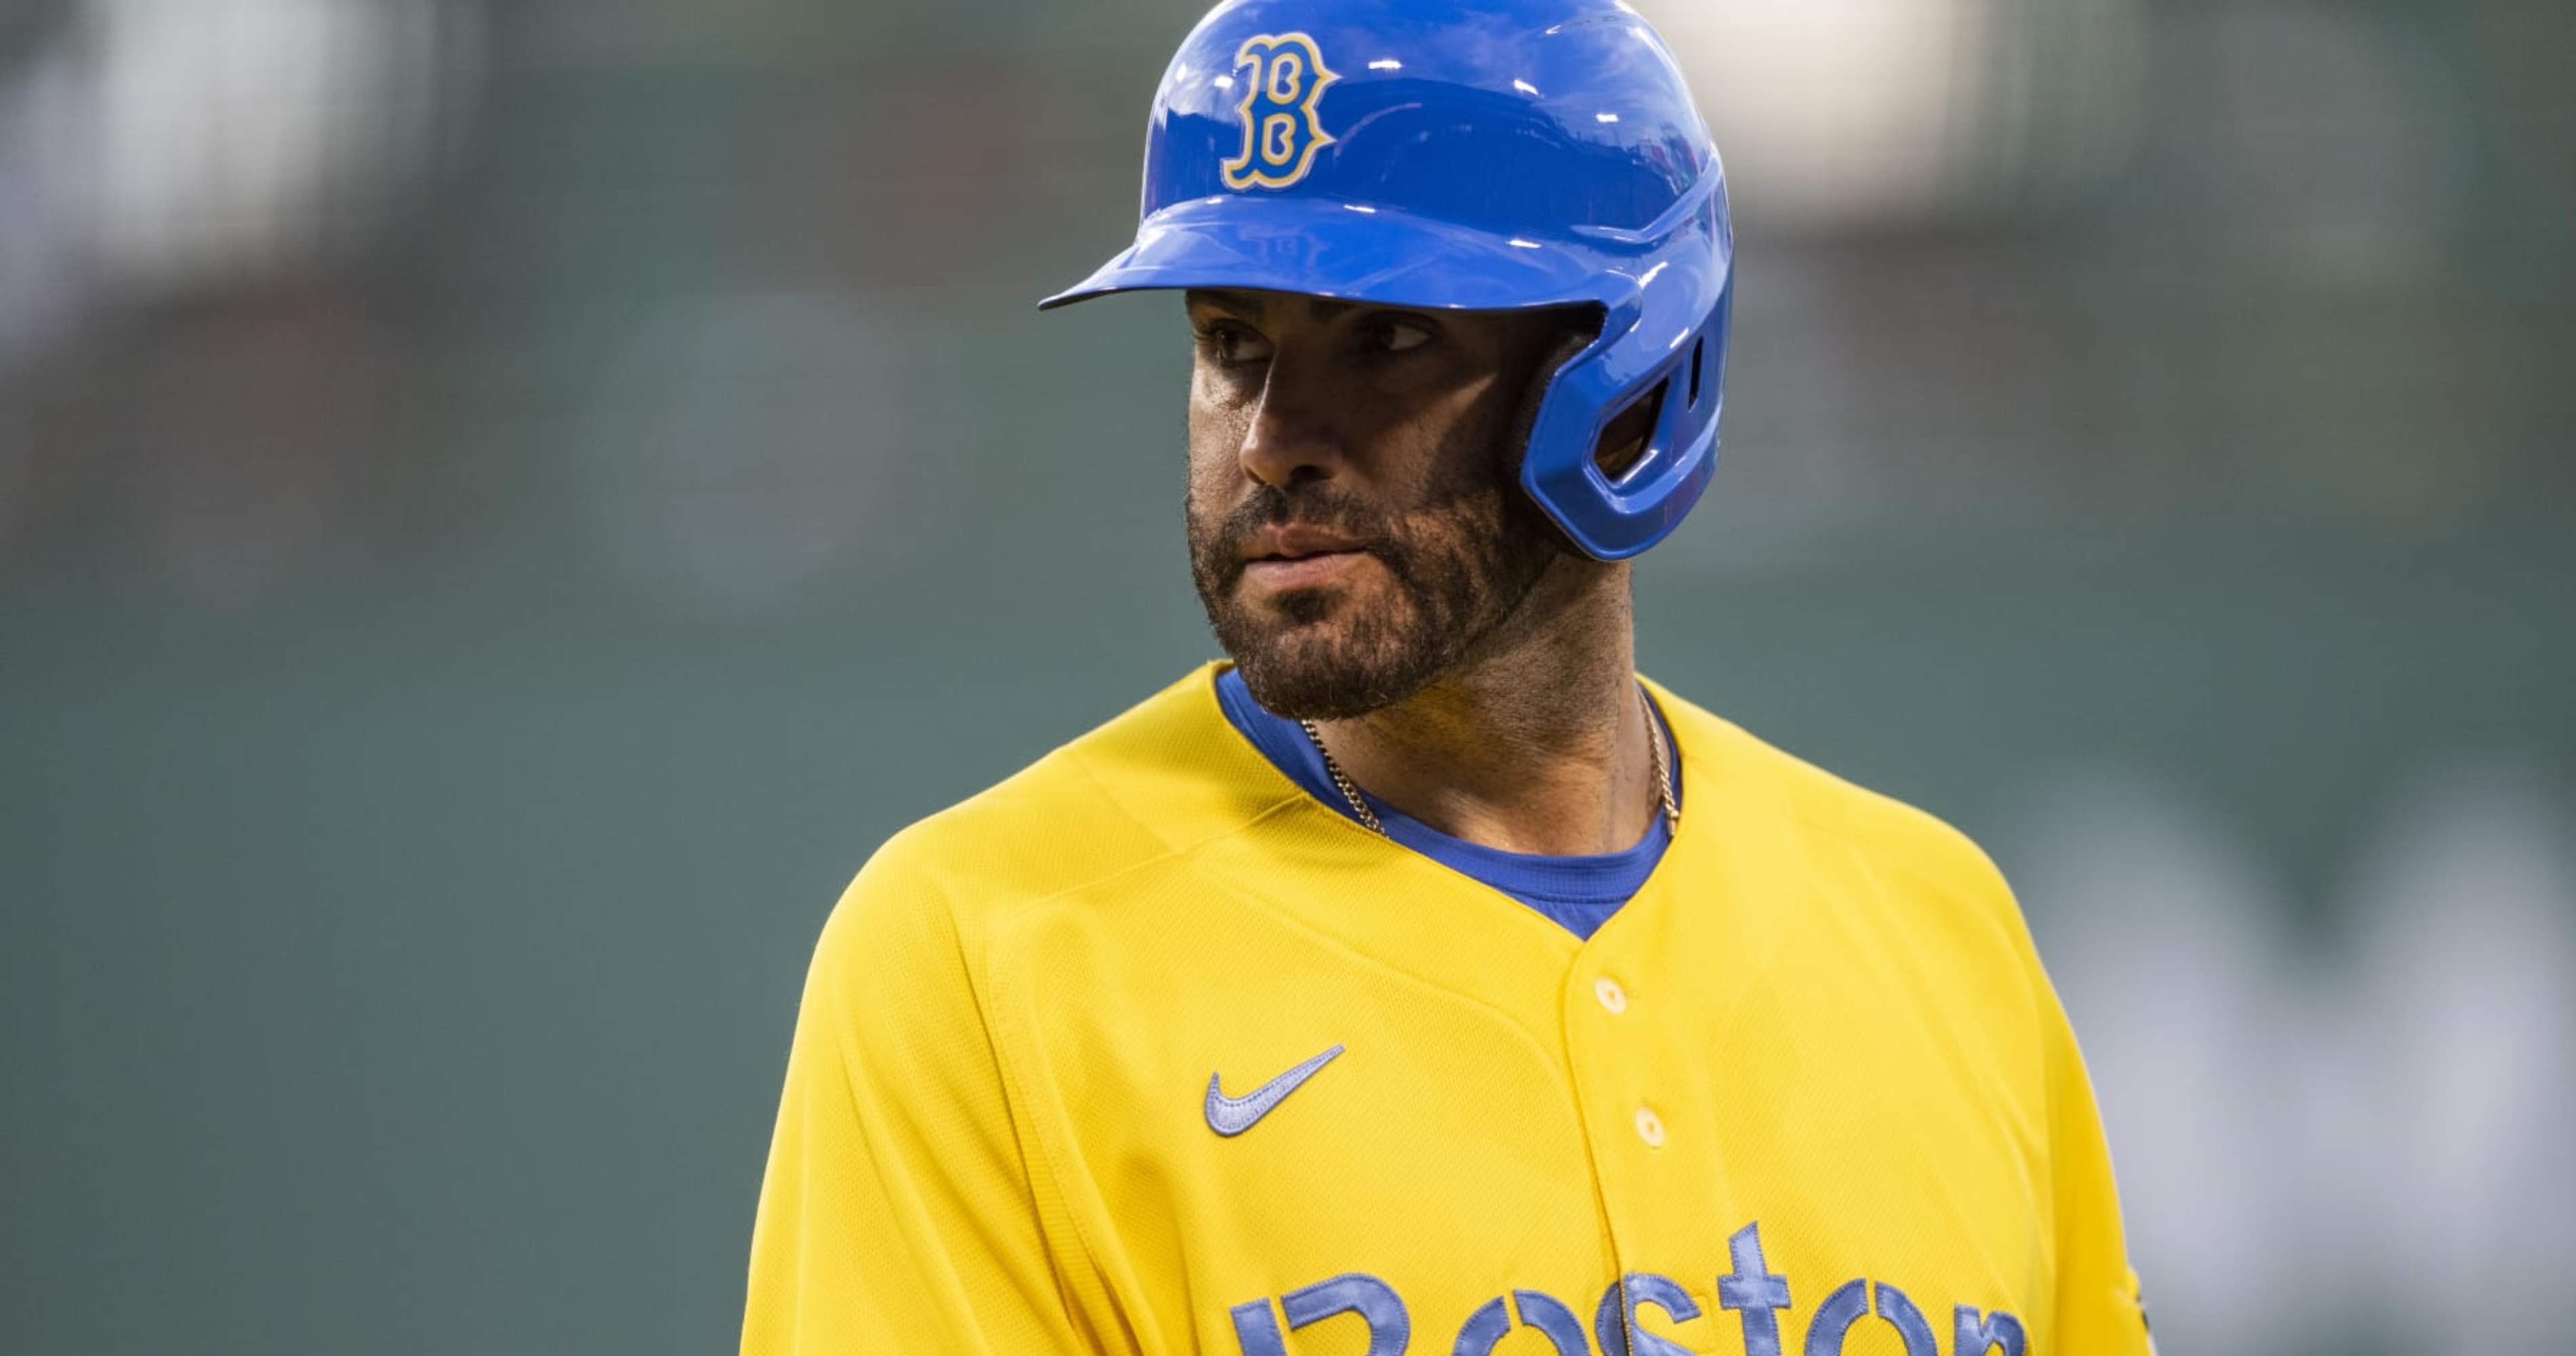 Red Sox rumors: 5 players who should already be on the trade block